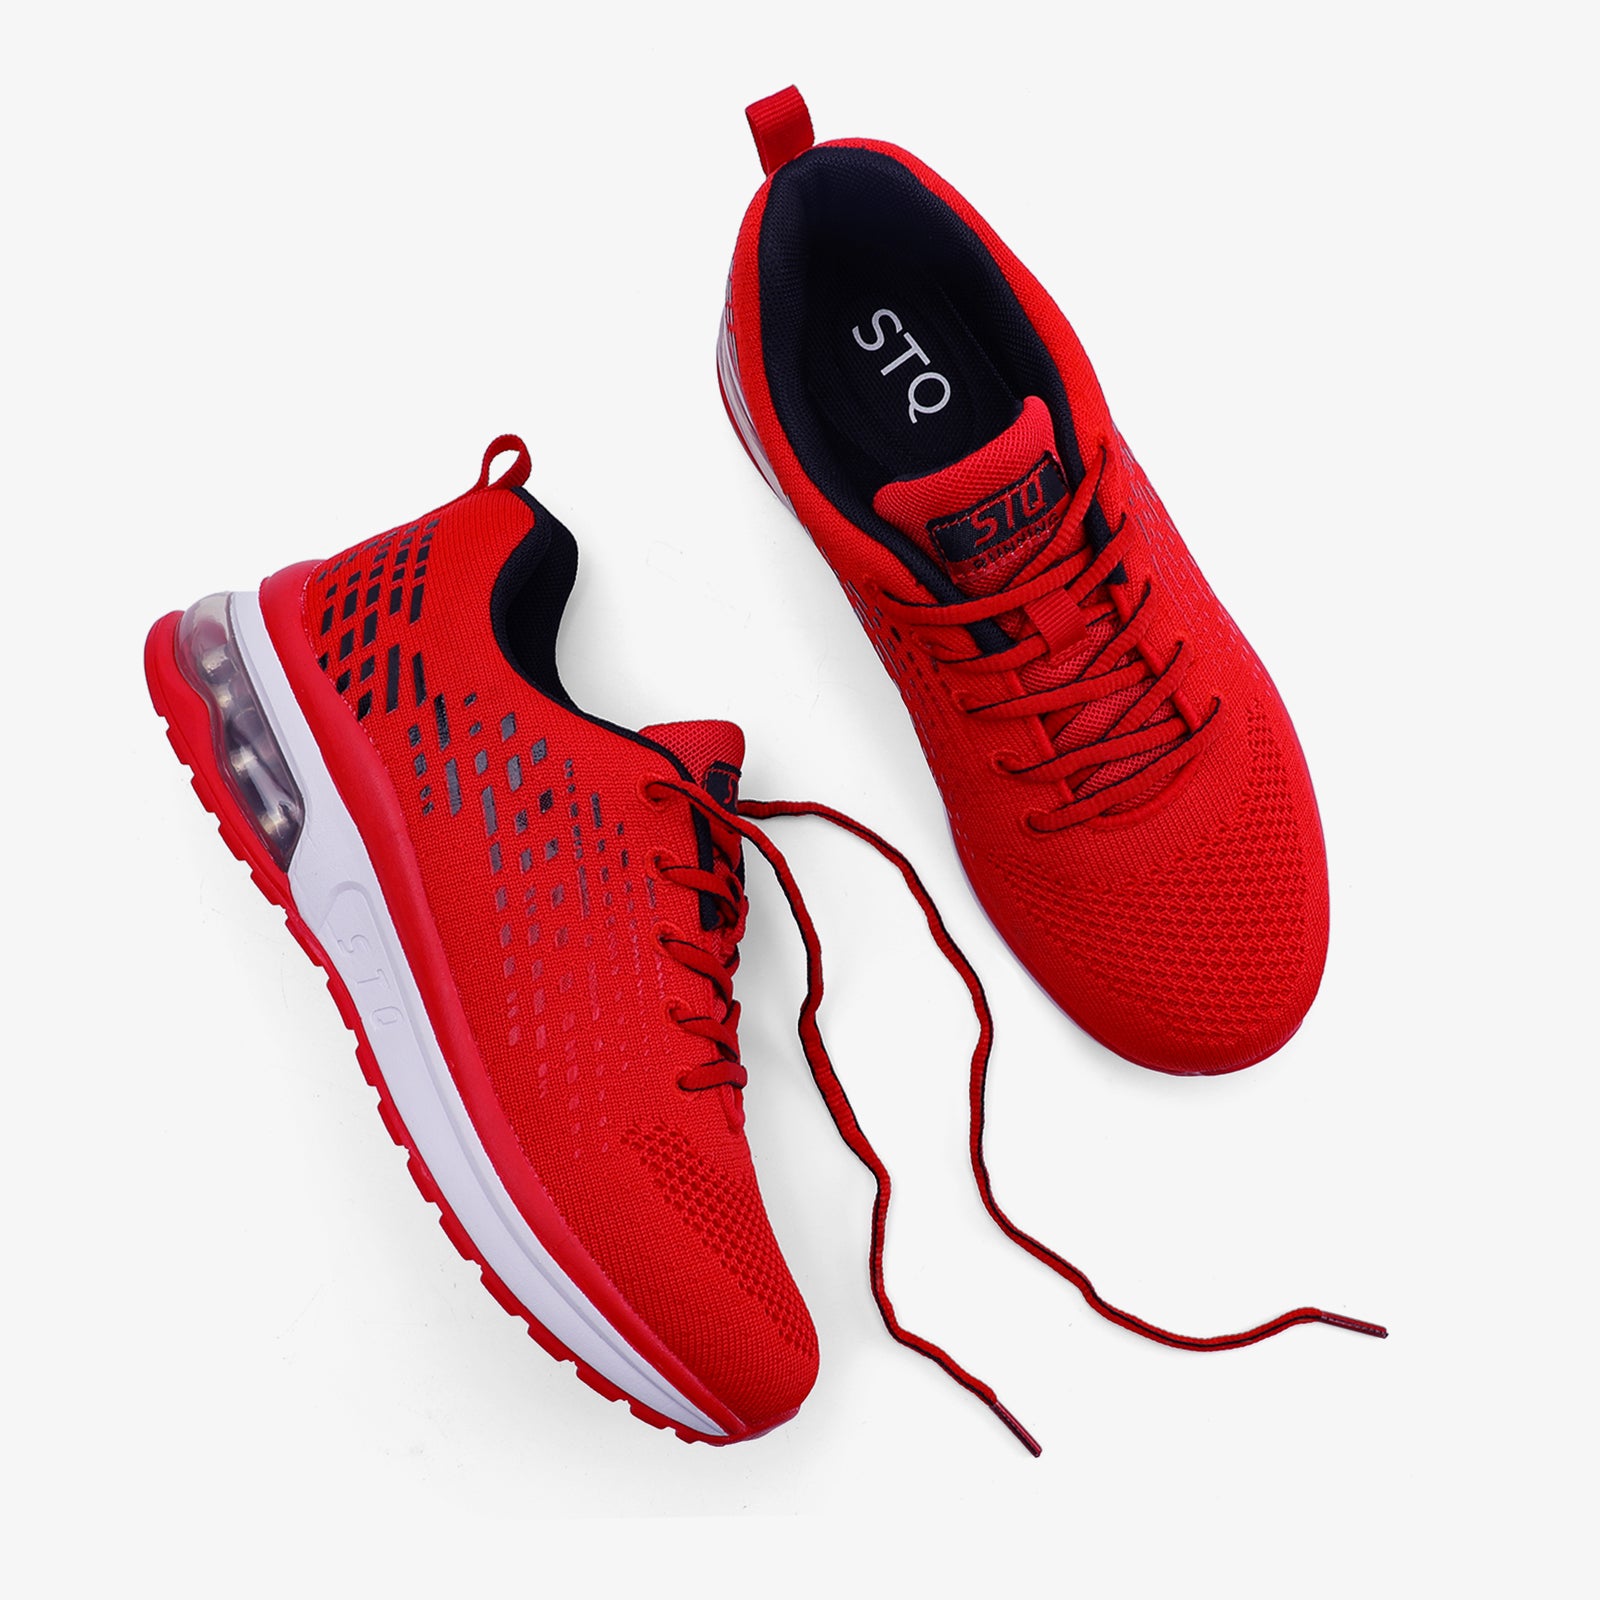 stq-air-cushion-running-shoes-sneakers-arch-support